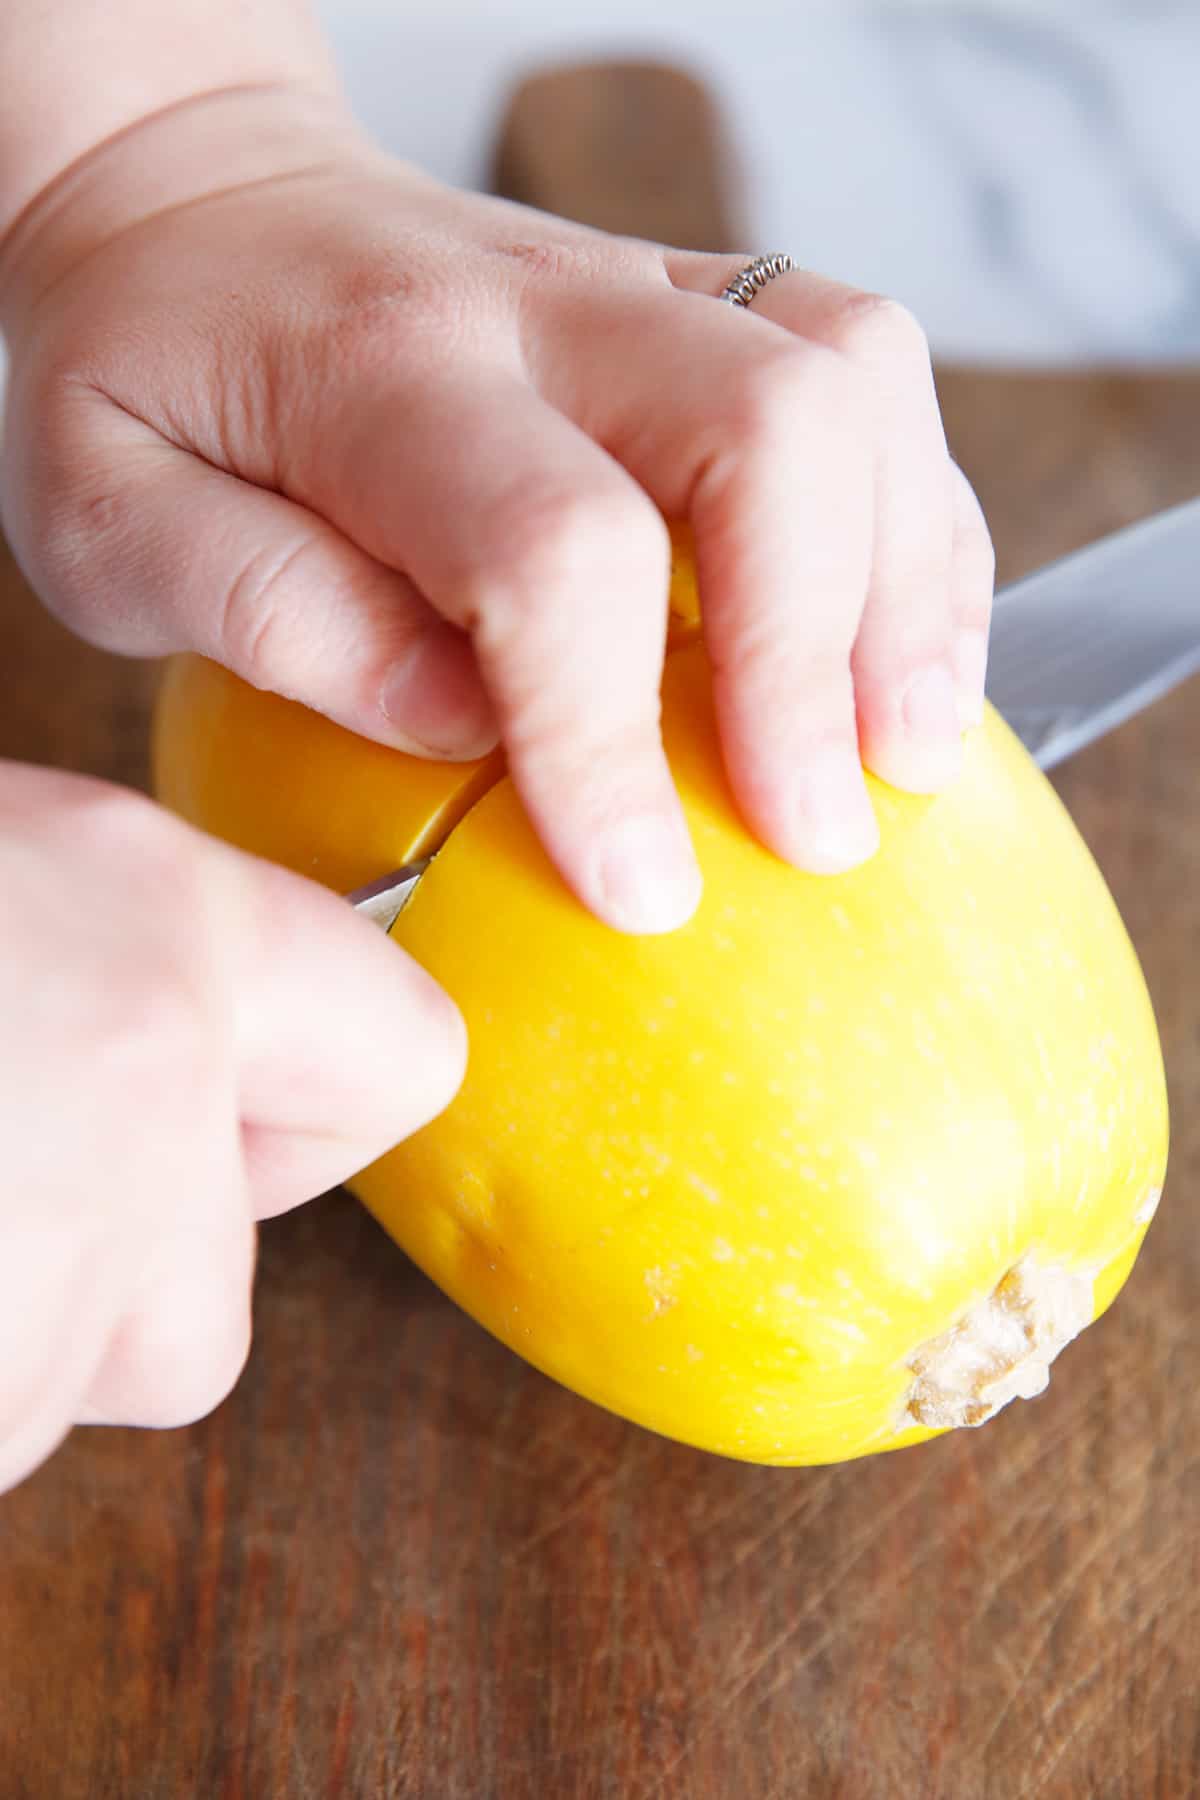 Safe knife skills so you can learn how to cut spaghetti squash